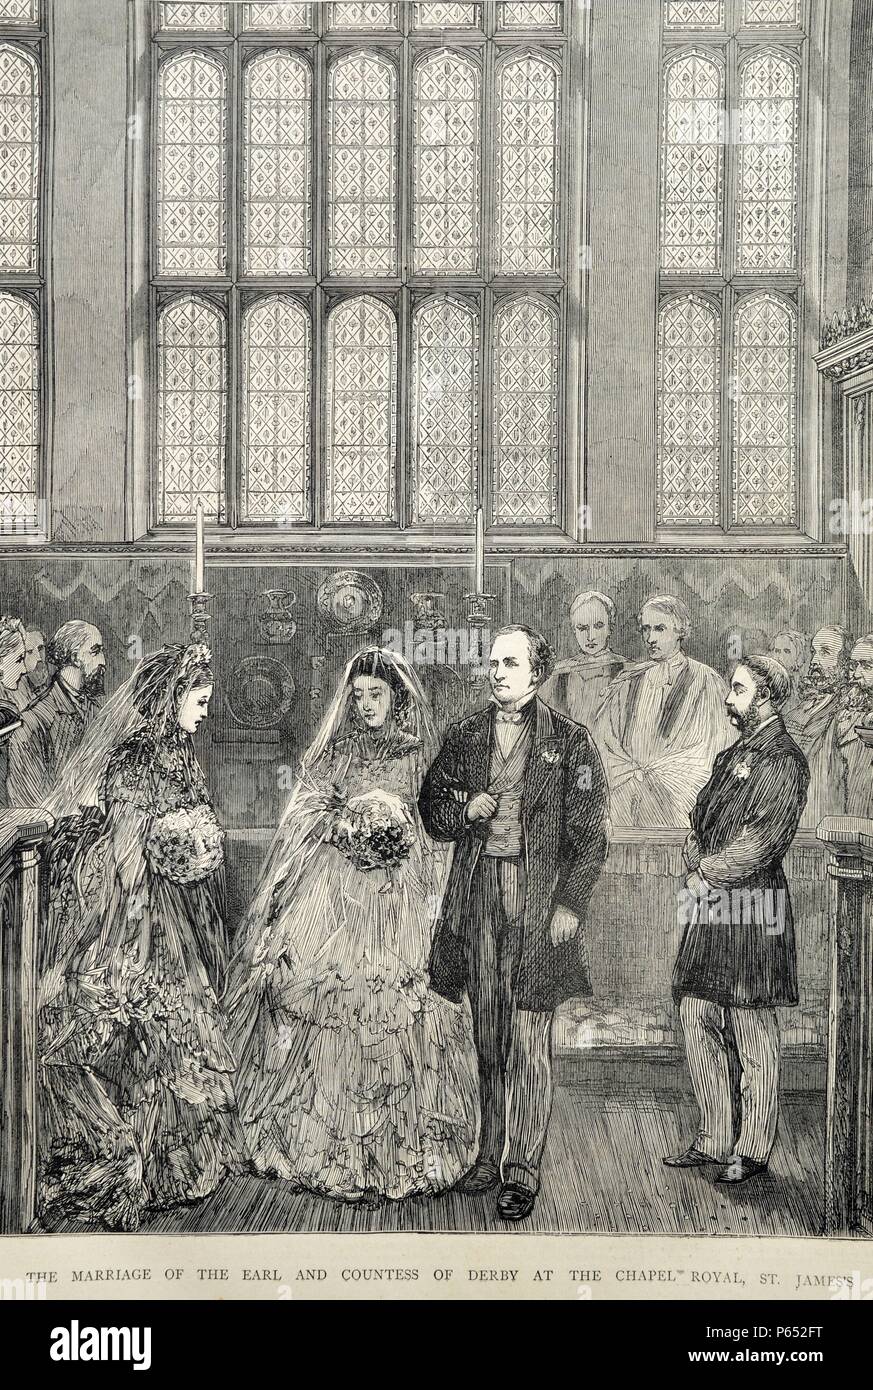 Engraving depicts the Marriage of the Earl and Countess of Derby at the Chapel Royal, St. James. Dated 1870 Stock Photo